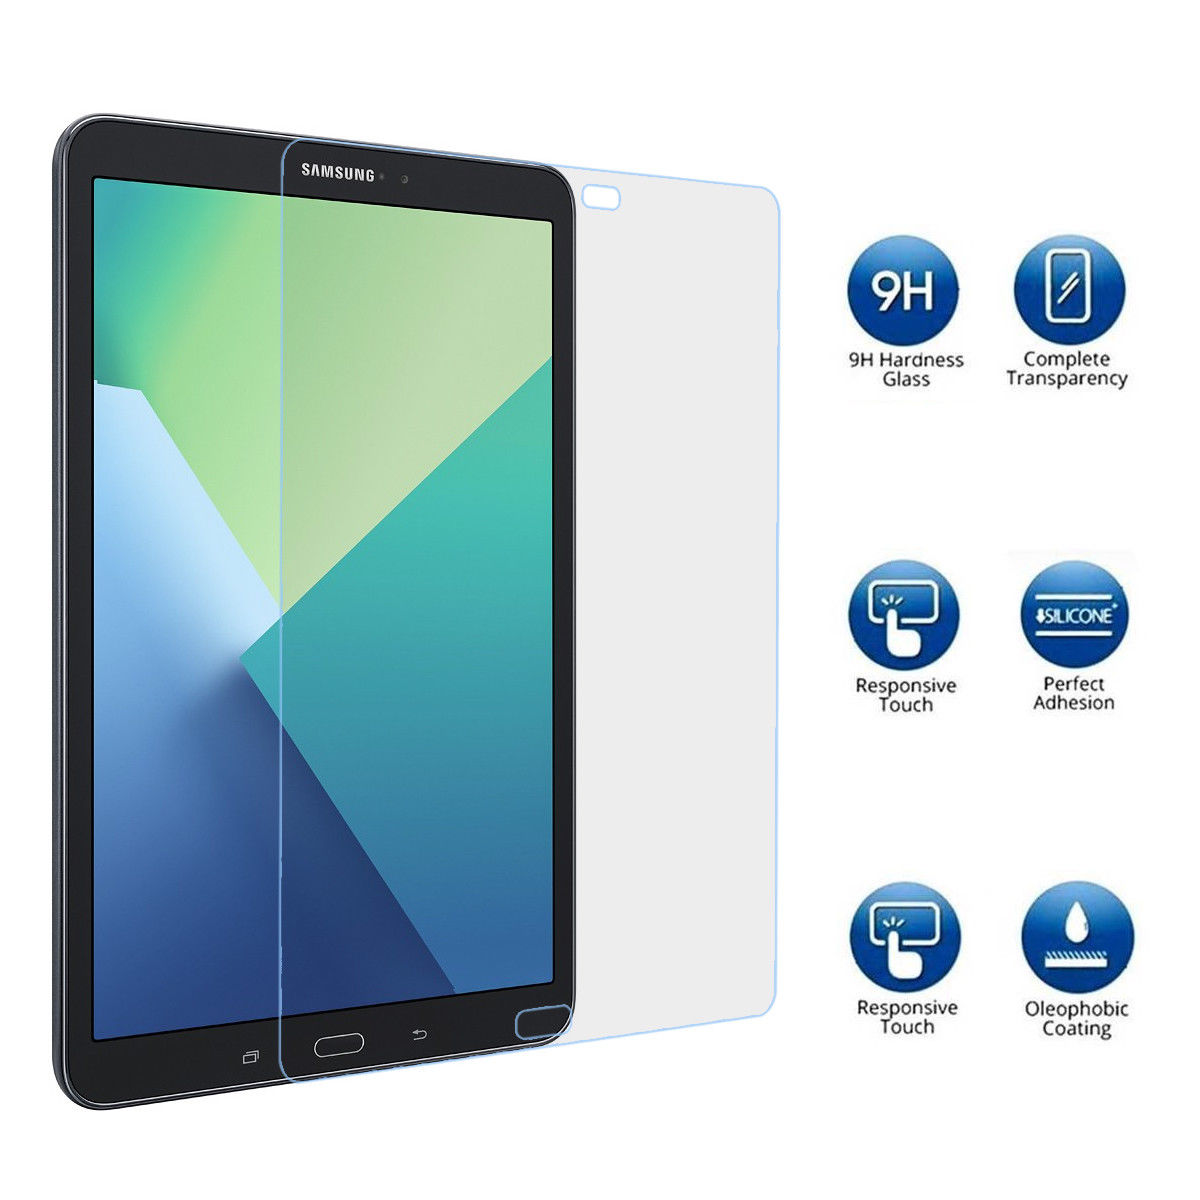 Galaxy Tab A 10.1 with S Pen Screen Protector, Mignova Tempered Glass Screen Protector with Anti-Scratch, Bubble Free for Samsung Galaxy Tab A 10.1 (with S Pen Model) SM-P580 [1-Pack] - image 2 of 6